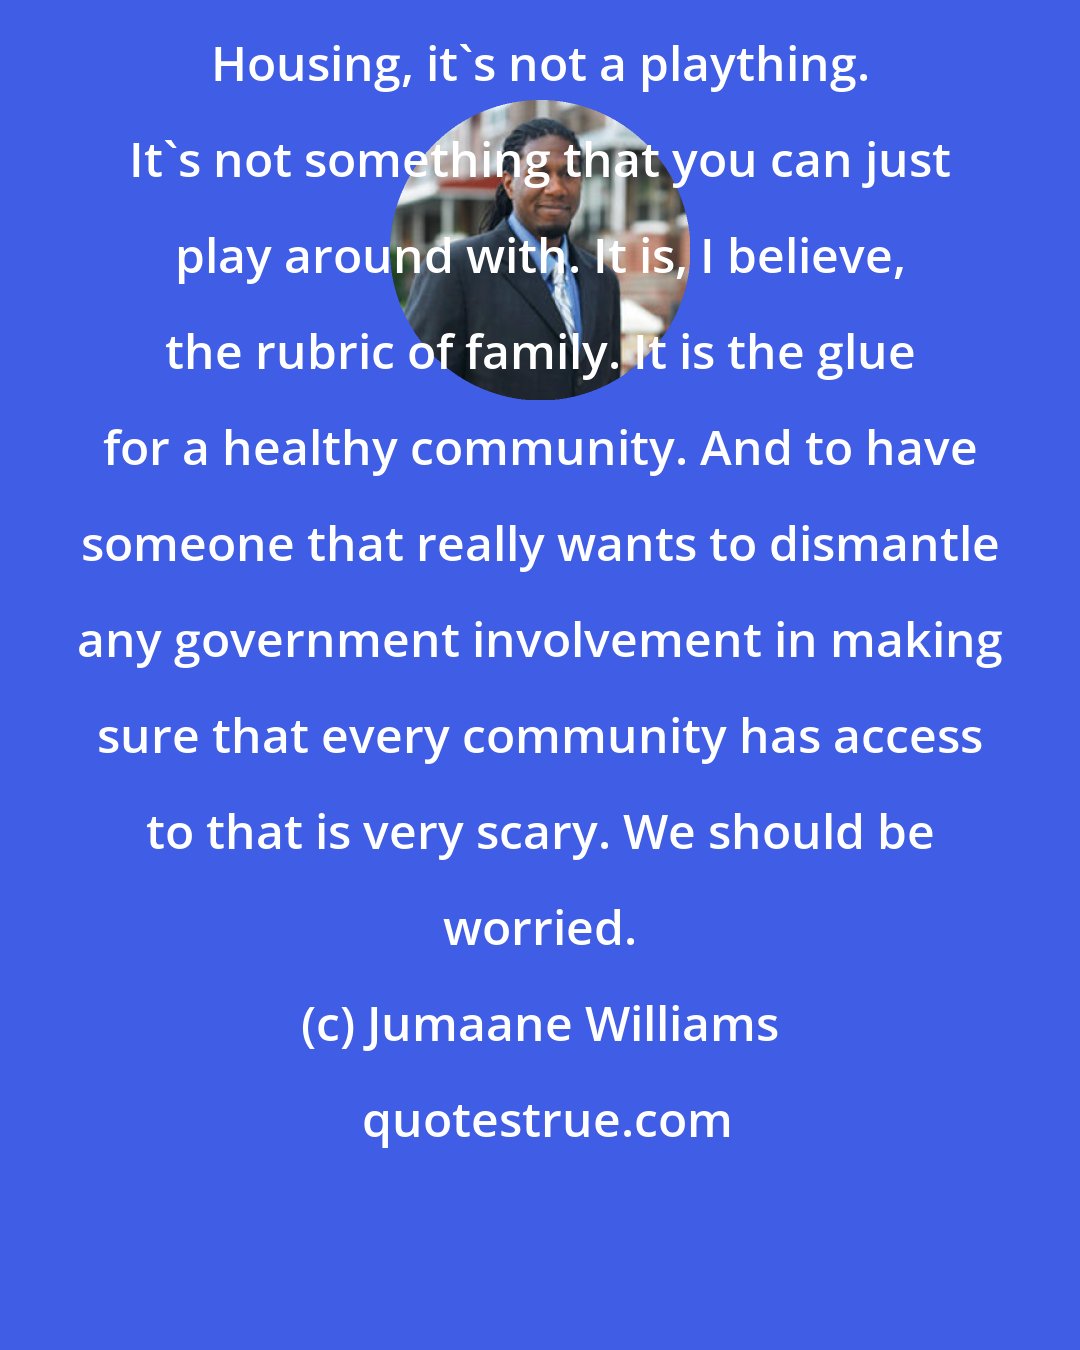 Jumaane Williams: Housing, it's not a plaything. It's not something that you can just play around with. It is, I believe, the rubric of family. It is the glue for a healthy community. And to have someone that really wants to dismantle any government involvement in making sure that every community has access to that is very scary. We should be worried.